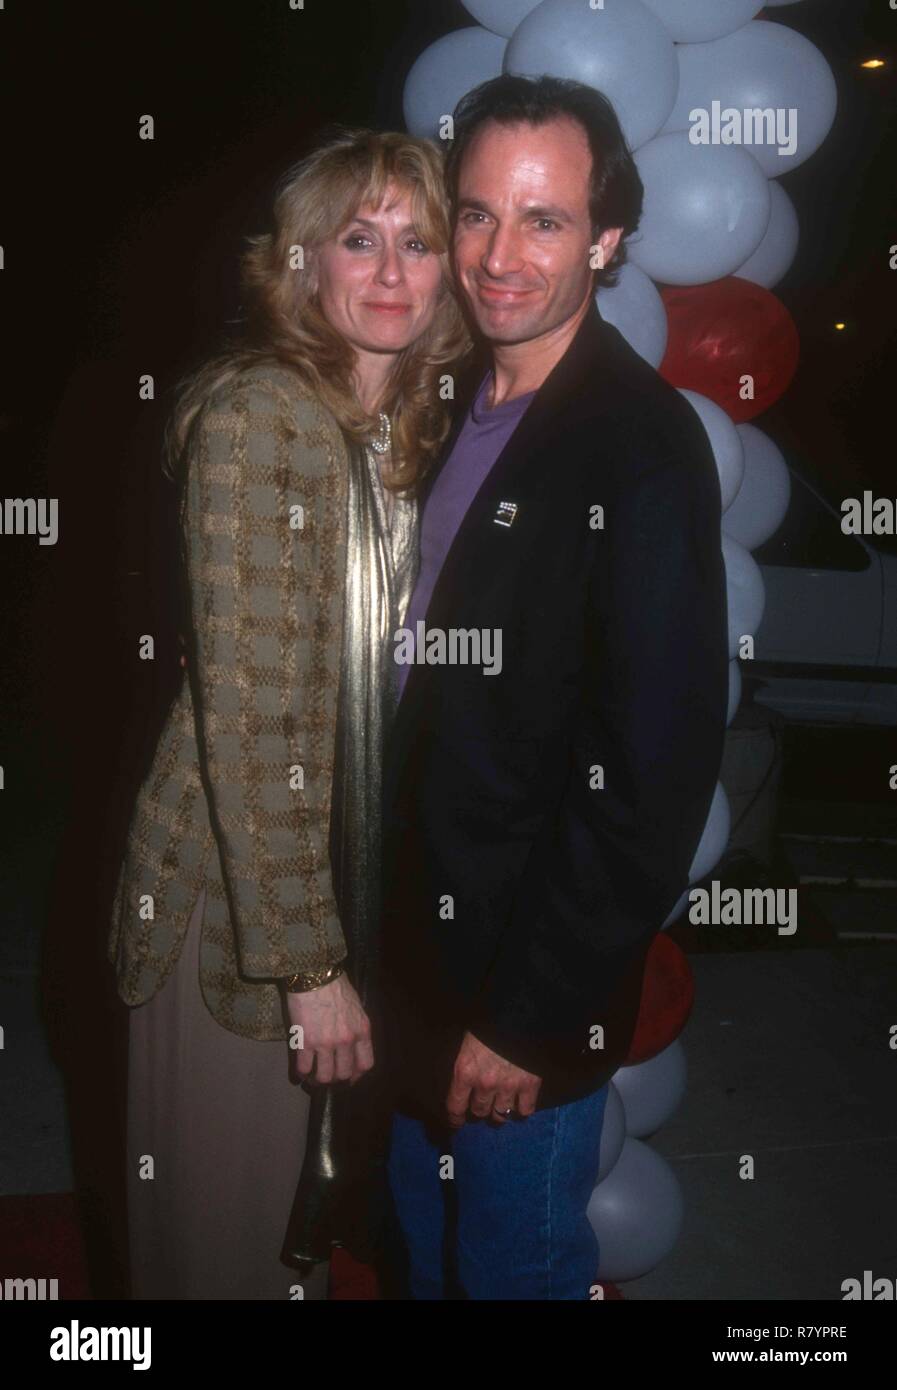 SANTA MONICA, CA - APRIL 8: Actress Judith Light and husband actor Robert Desiderio attend event on April 8, 1993 at The Museum of Flying in Santa Monica, California. Photo by Barry King/Alamy Stock Photo Stock Photo